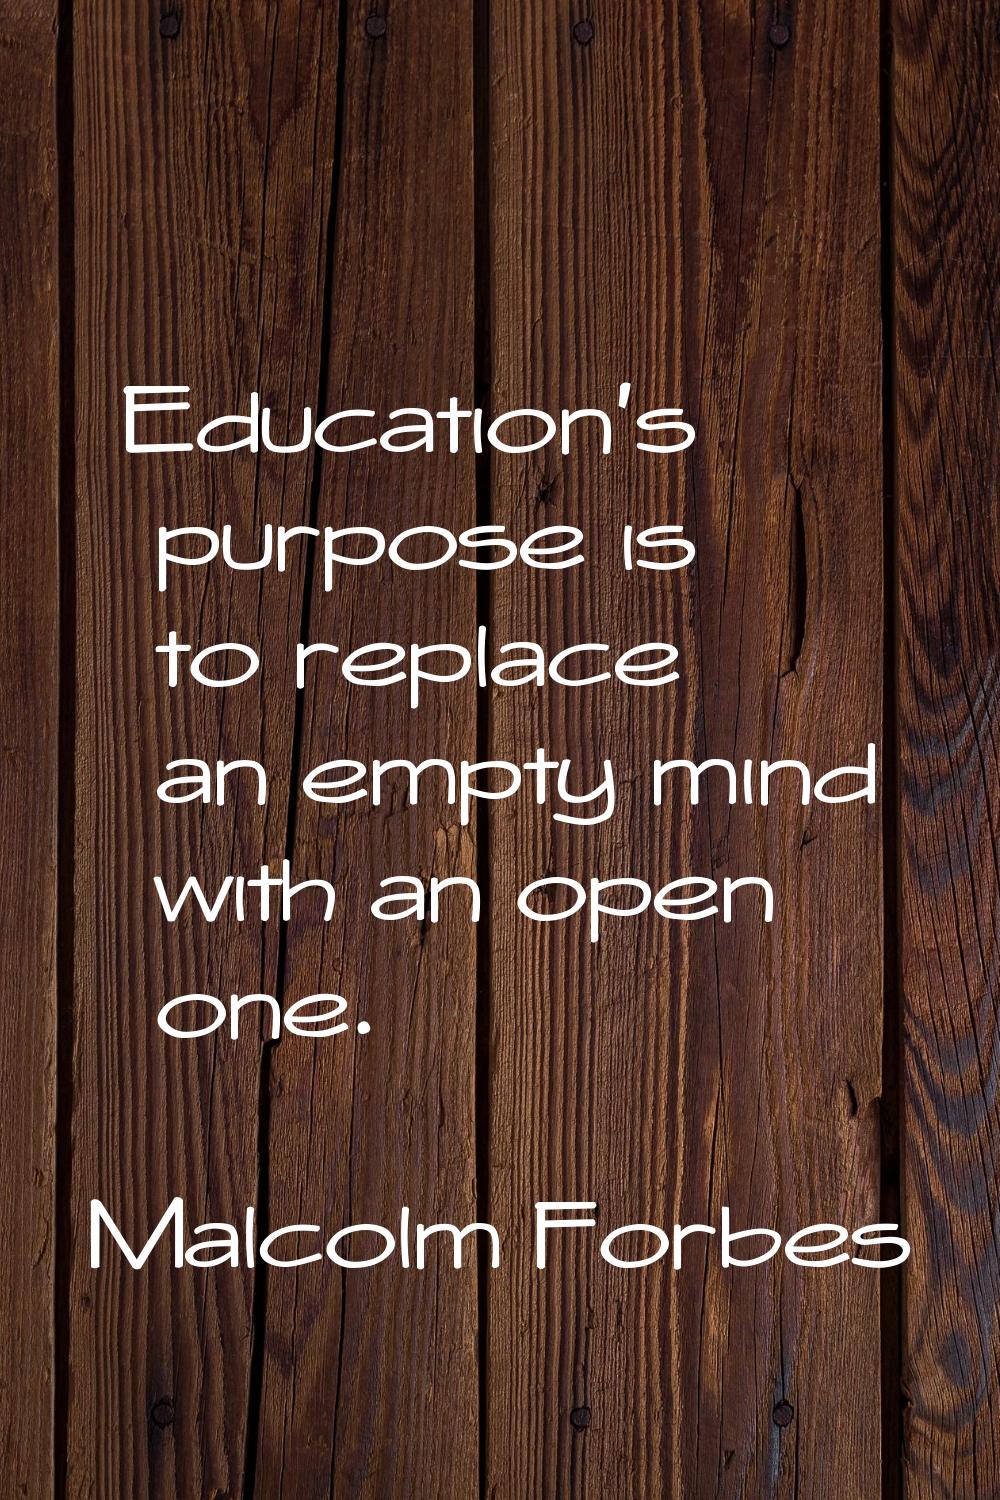 Education's purpose is to replace an empty mind with an open one.